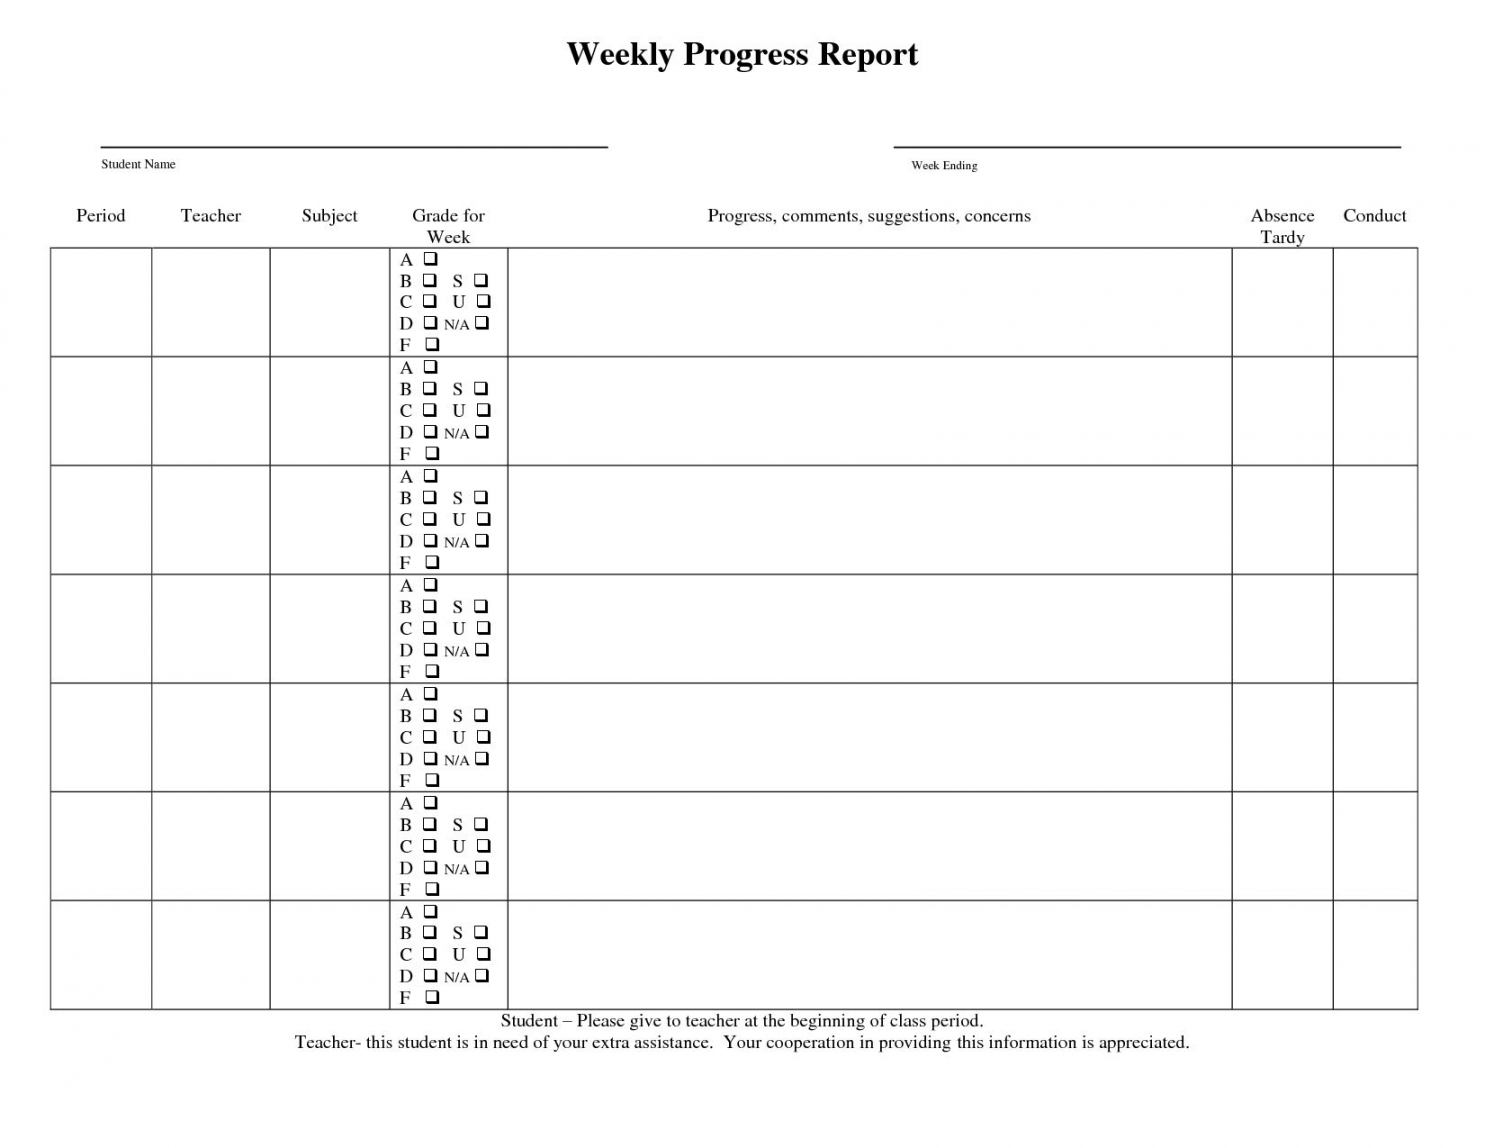 Daily Progress Report Format Excel Construction Glendale Within Construction Daily Progress Report Template